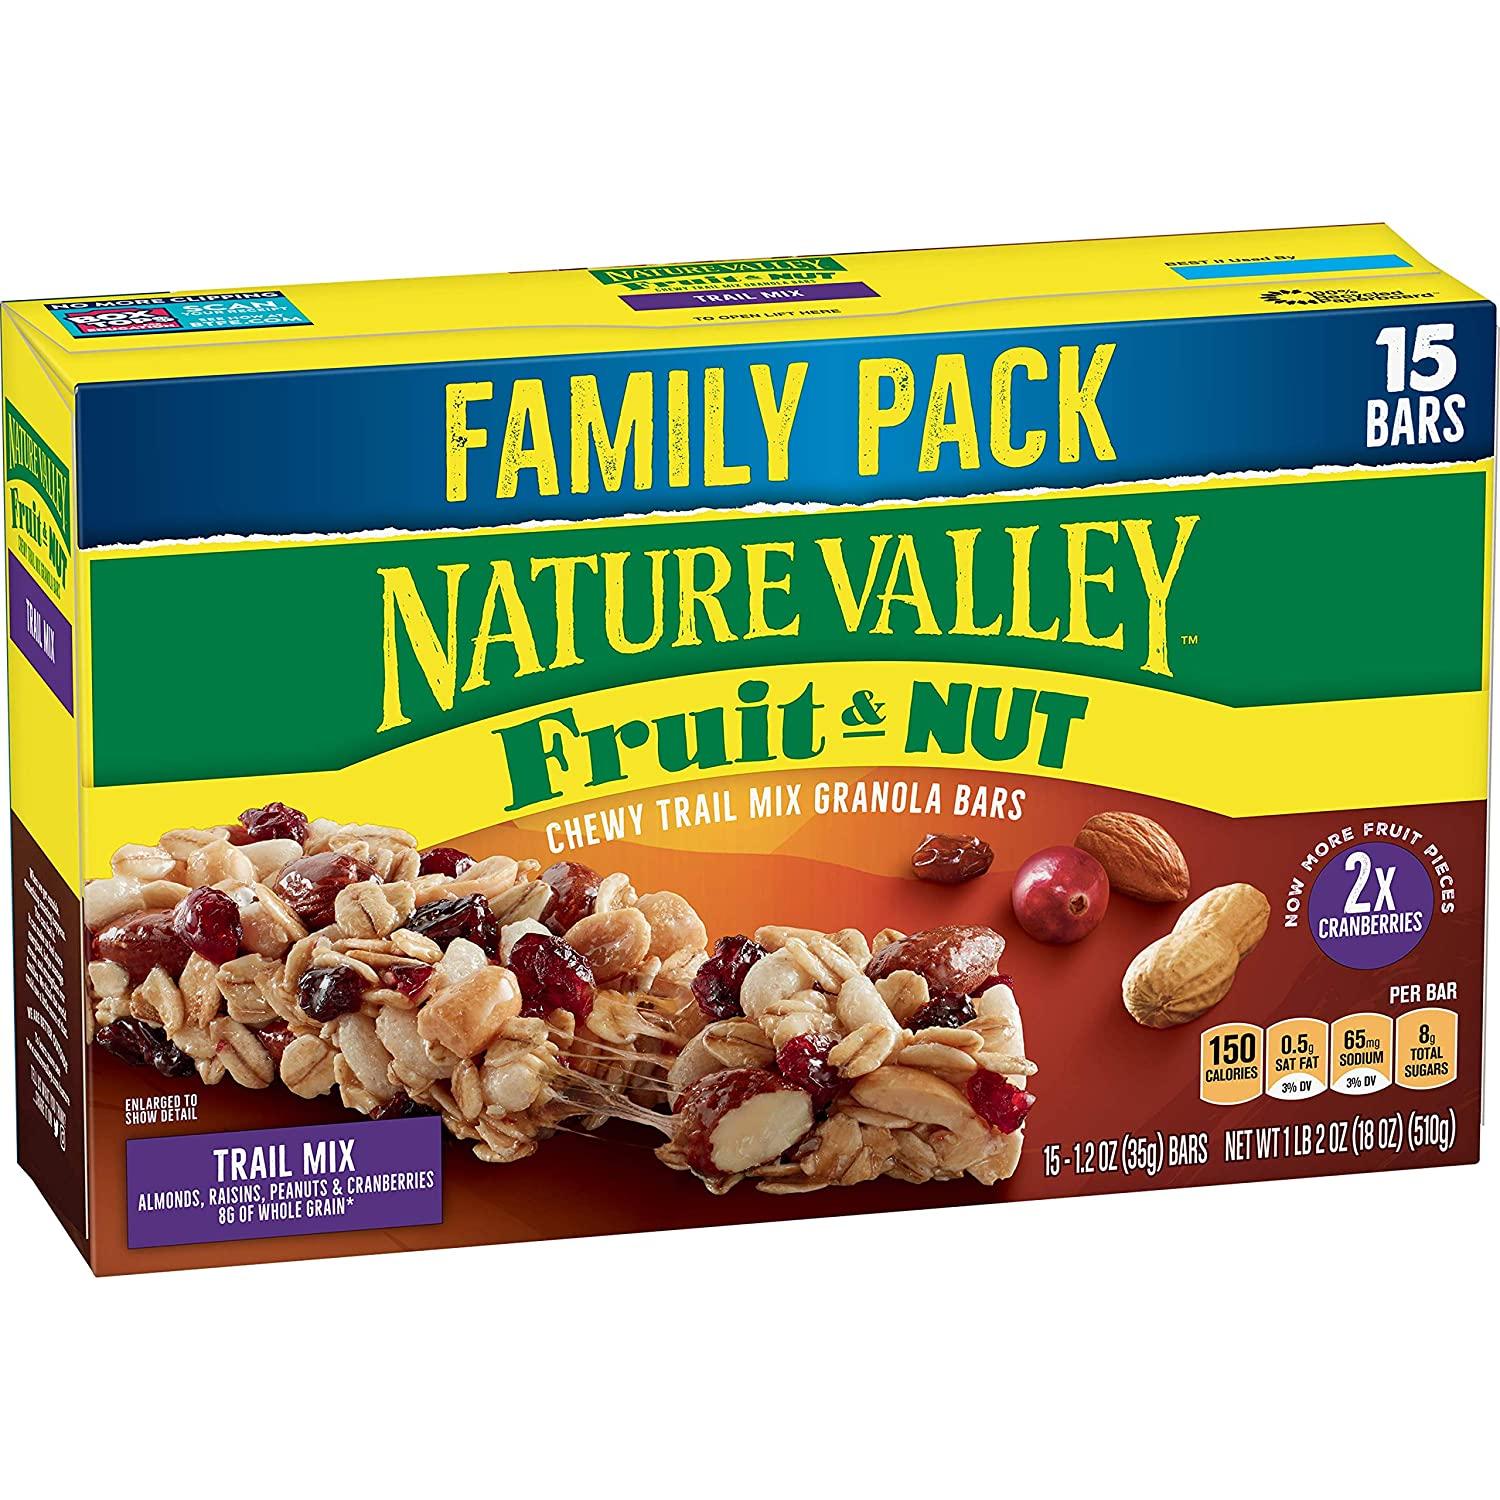 15 Nature Valley Granola Bars for $5.98